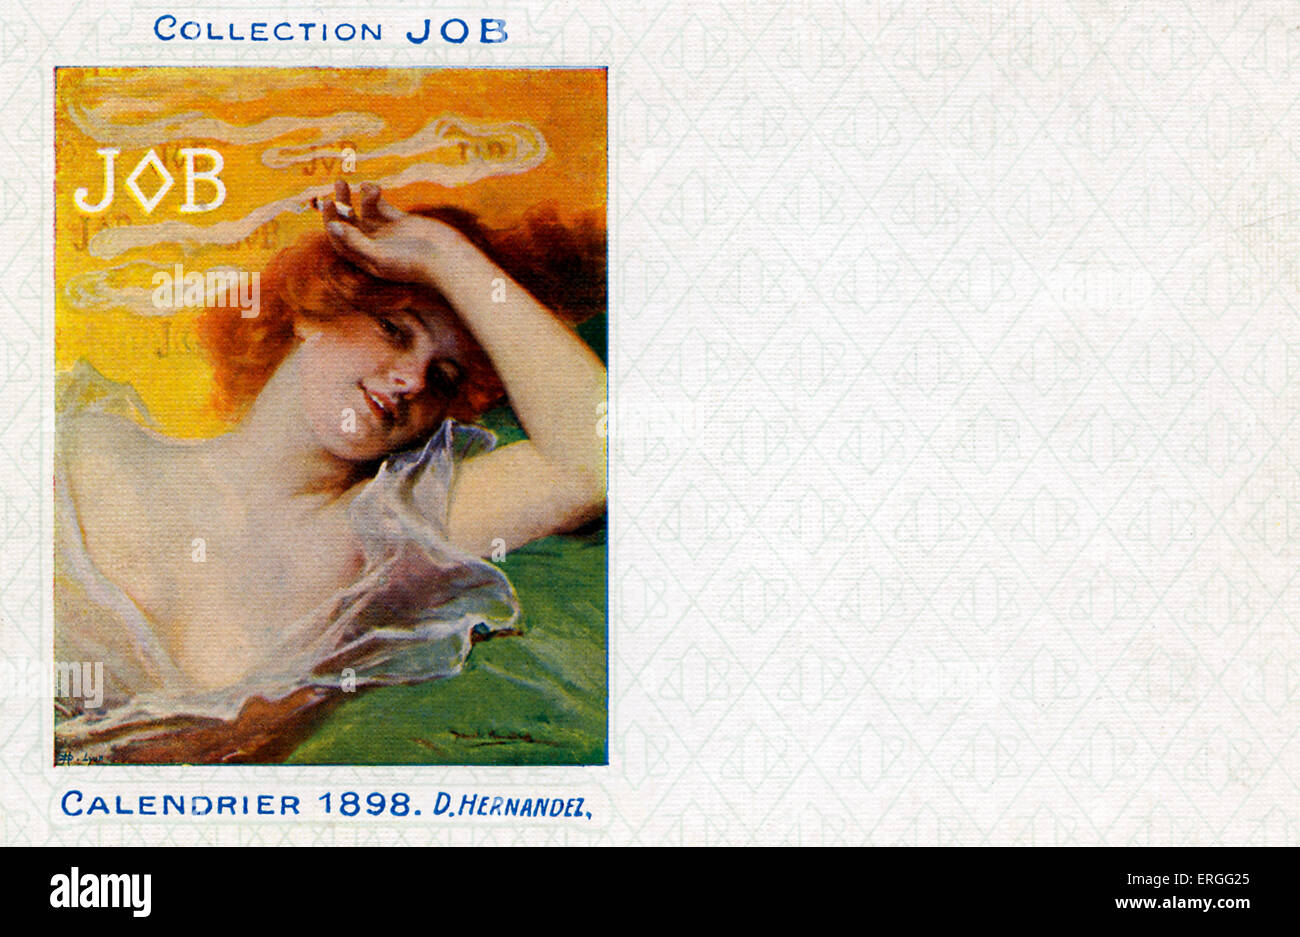 Collection Job - 1898 Calendar by D. Hernandez. Late 19th century French advertisement for cigarette papers. Stock Photo